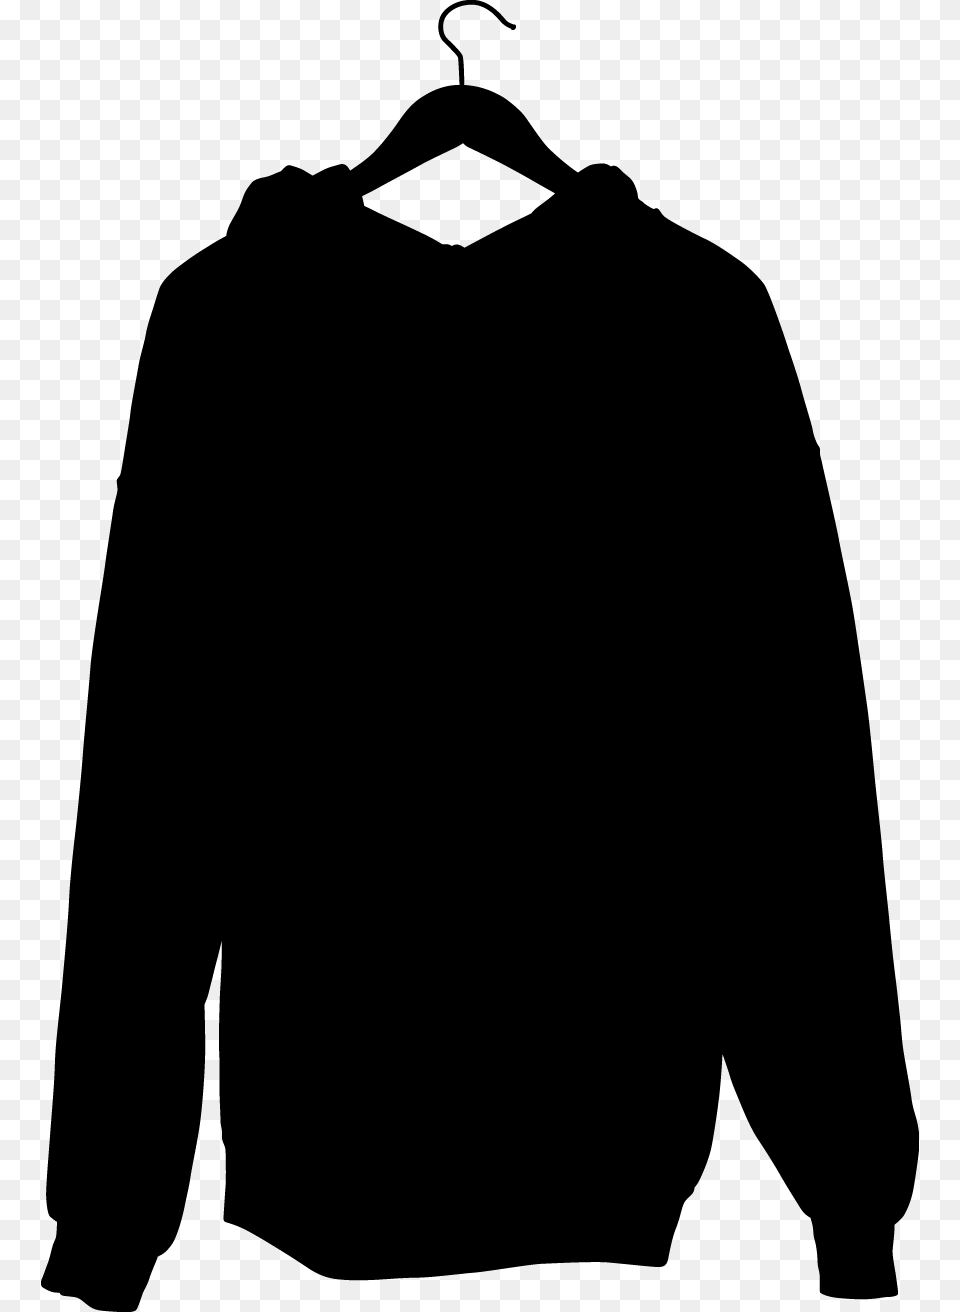 Clothing Shoes Silhouette Jeans Amp Army Shop Bremen, Hoodie, Knitwear, Sweater, Sweatshirt Png Image